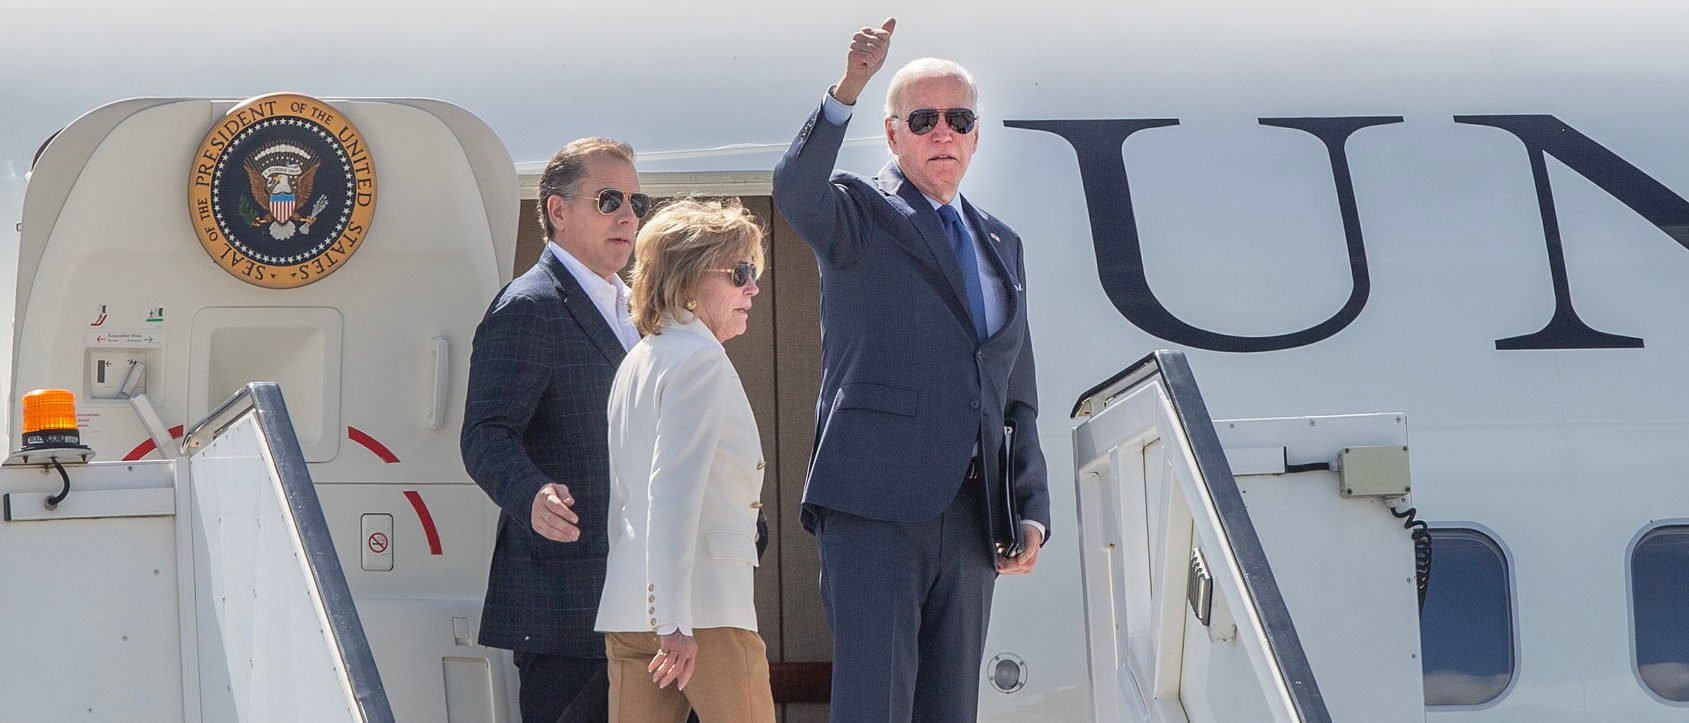 DUBLIN, IRELAND - APRIL 14: In this handout image provided by the Irish Government, US President Joe Biden departs Dublin Airport on Air Force One with his sister Valerie and son Hunter on April 14, 2023 in Dublin, Ireland. US President Joe Biden has travelled to Northern Ireland and Ireland with his sister Valerie Biden Owens and son Hunter Biden to explore his family's Irish heritage and mark the 25th Anniversary of the Good Friday Peace Agreement. (Photo by Julien Behal/Irish Government via Getty Images)